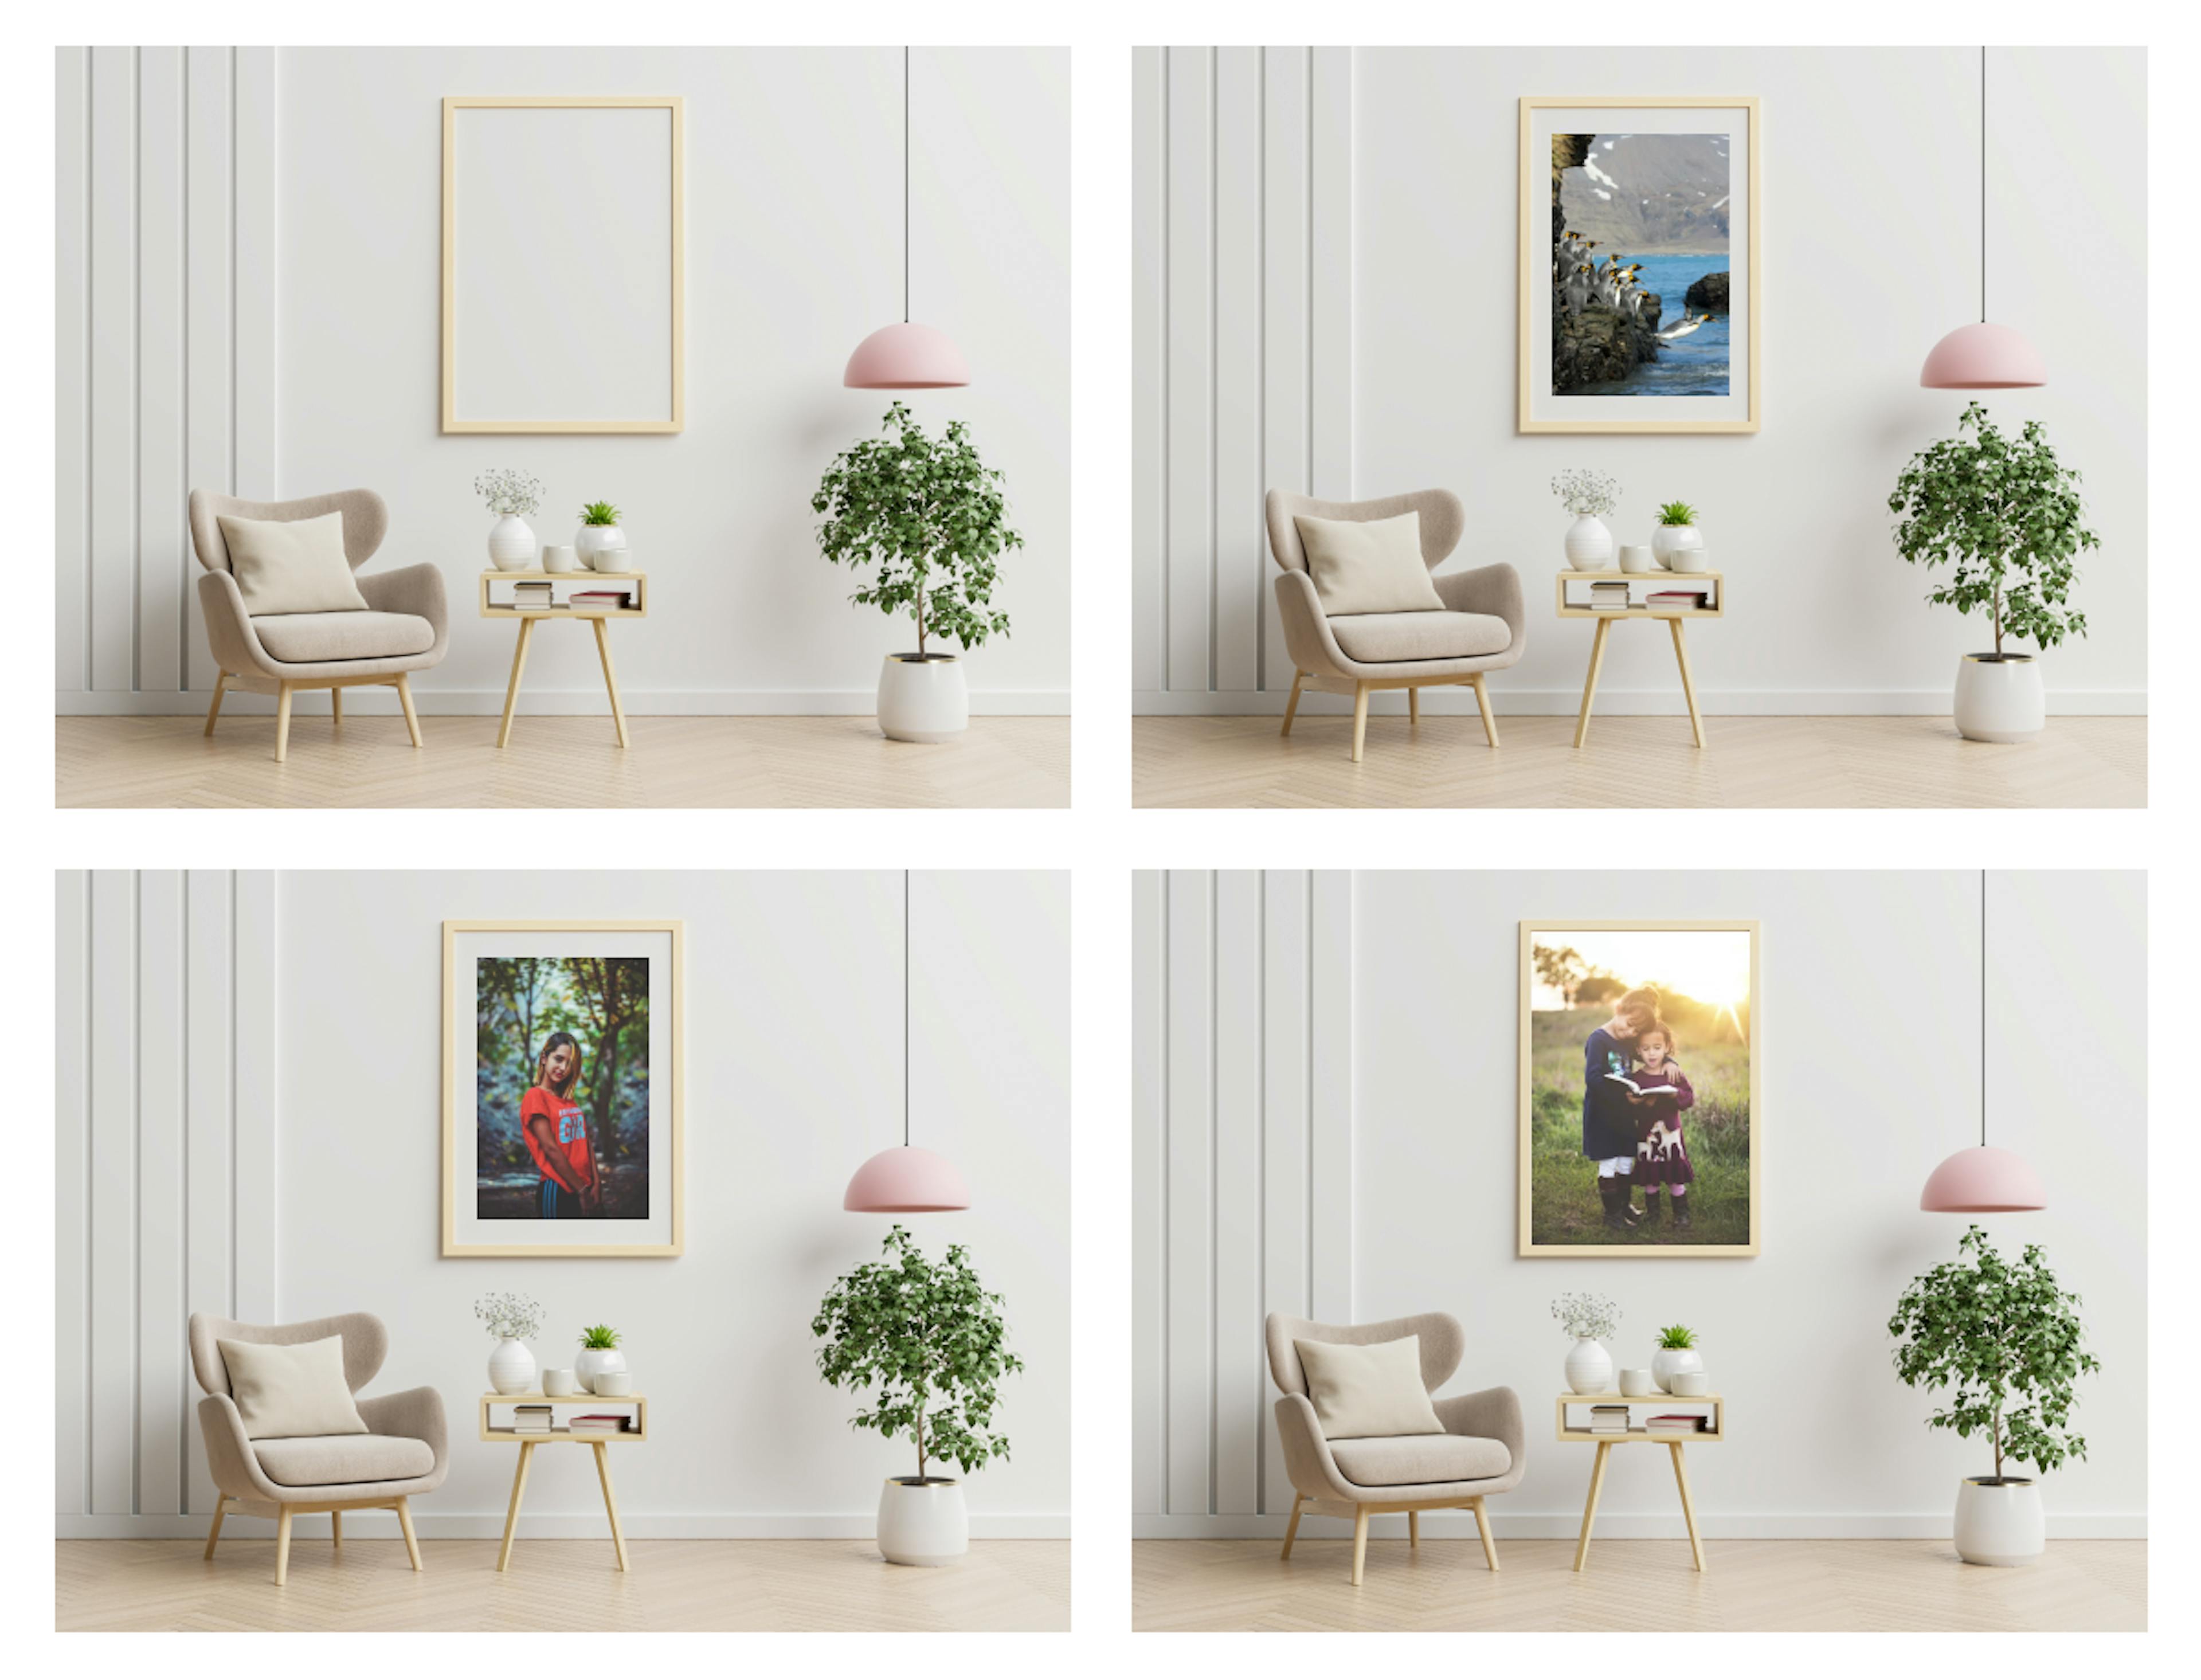 Generate images to show how your goods (pictures, art, furniture, etc) look in the customer's interior